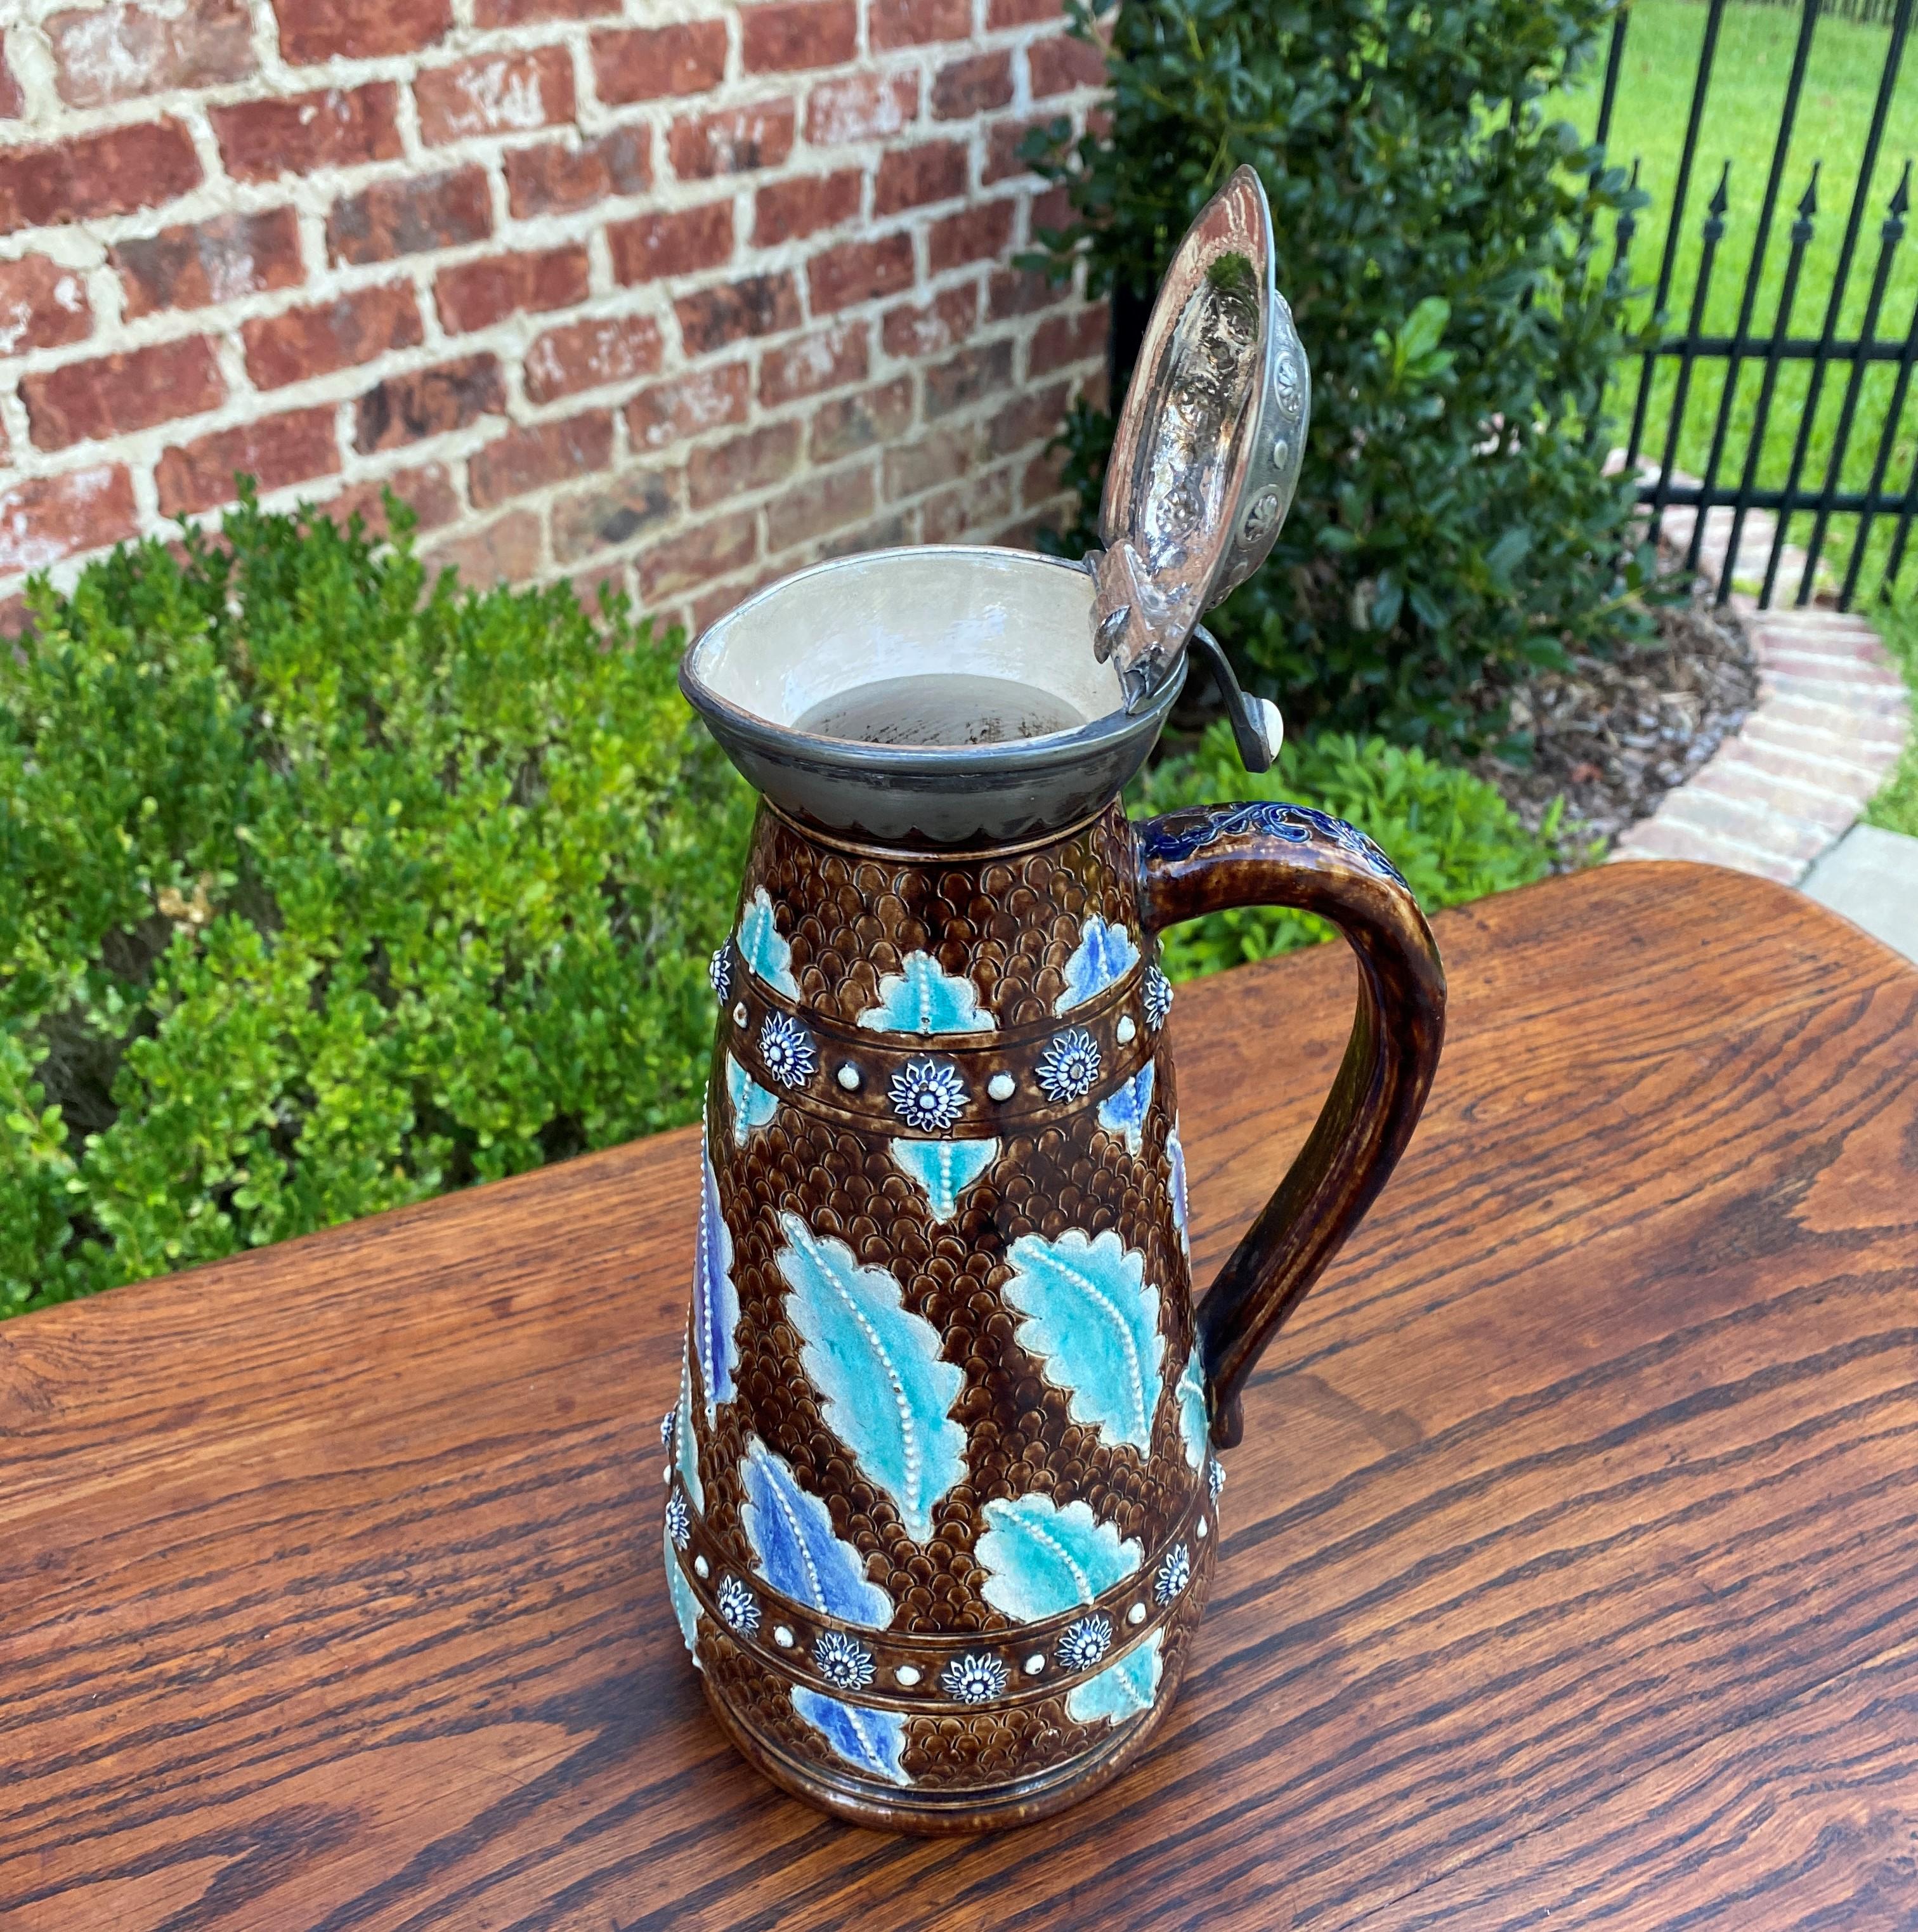 Early 20th Century Antique French Majolica Stein Jug Pitcher Silver or Pewter Hinged Lid, c. 1900 For Sale